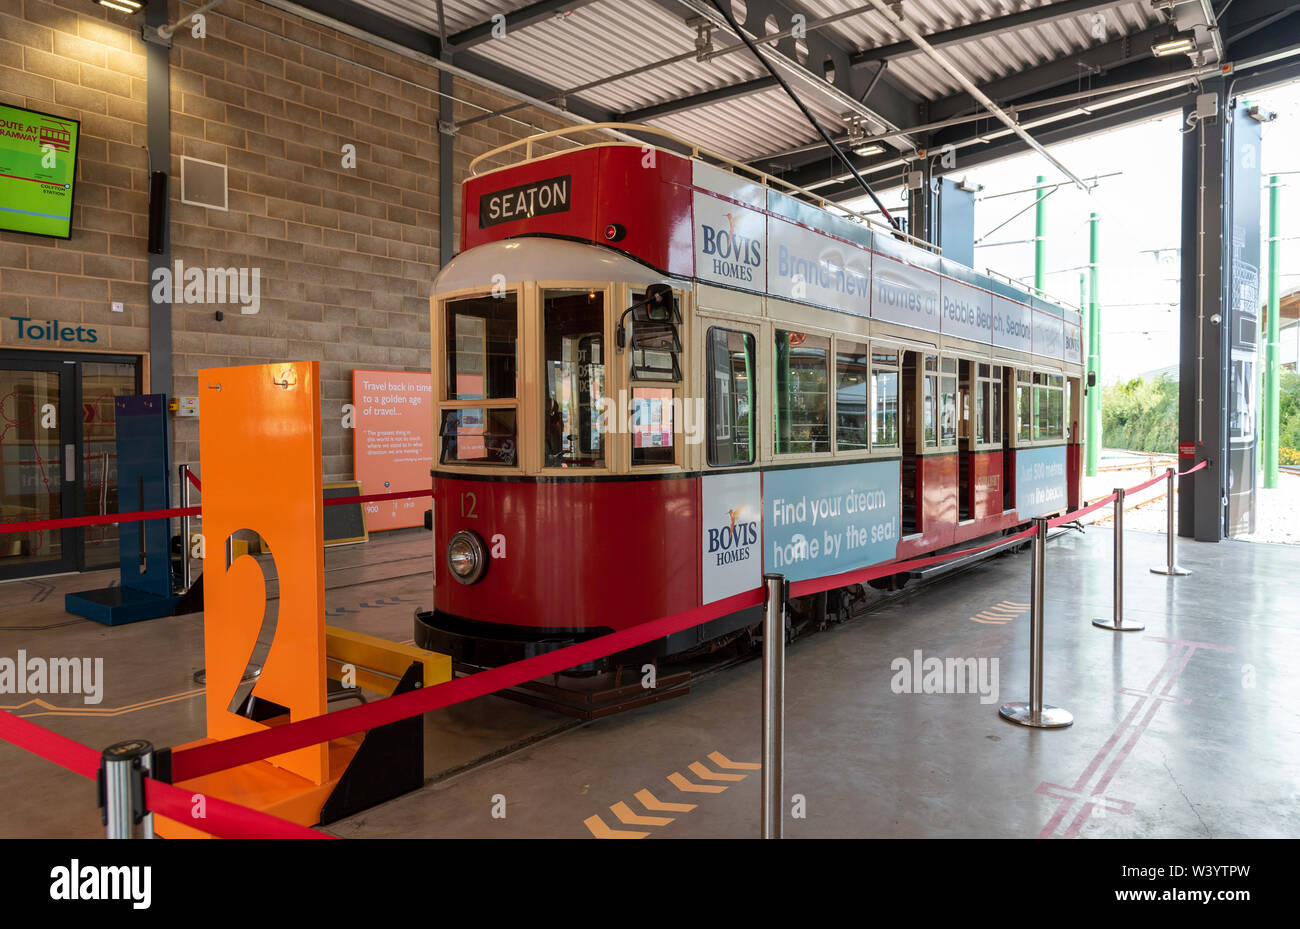 Seaton, Devon, England, UK.  Tramcar number 12 in the Seaton Tramway Station, the car was built in Eastbourne and rebuilt as an open topper in 1980. U Stock Photo